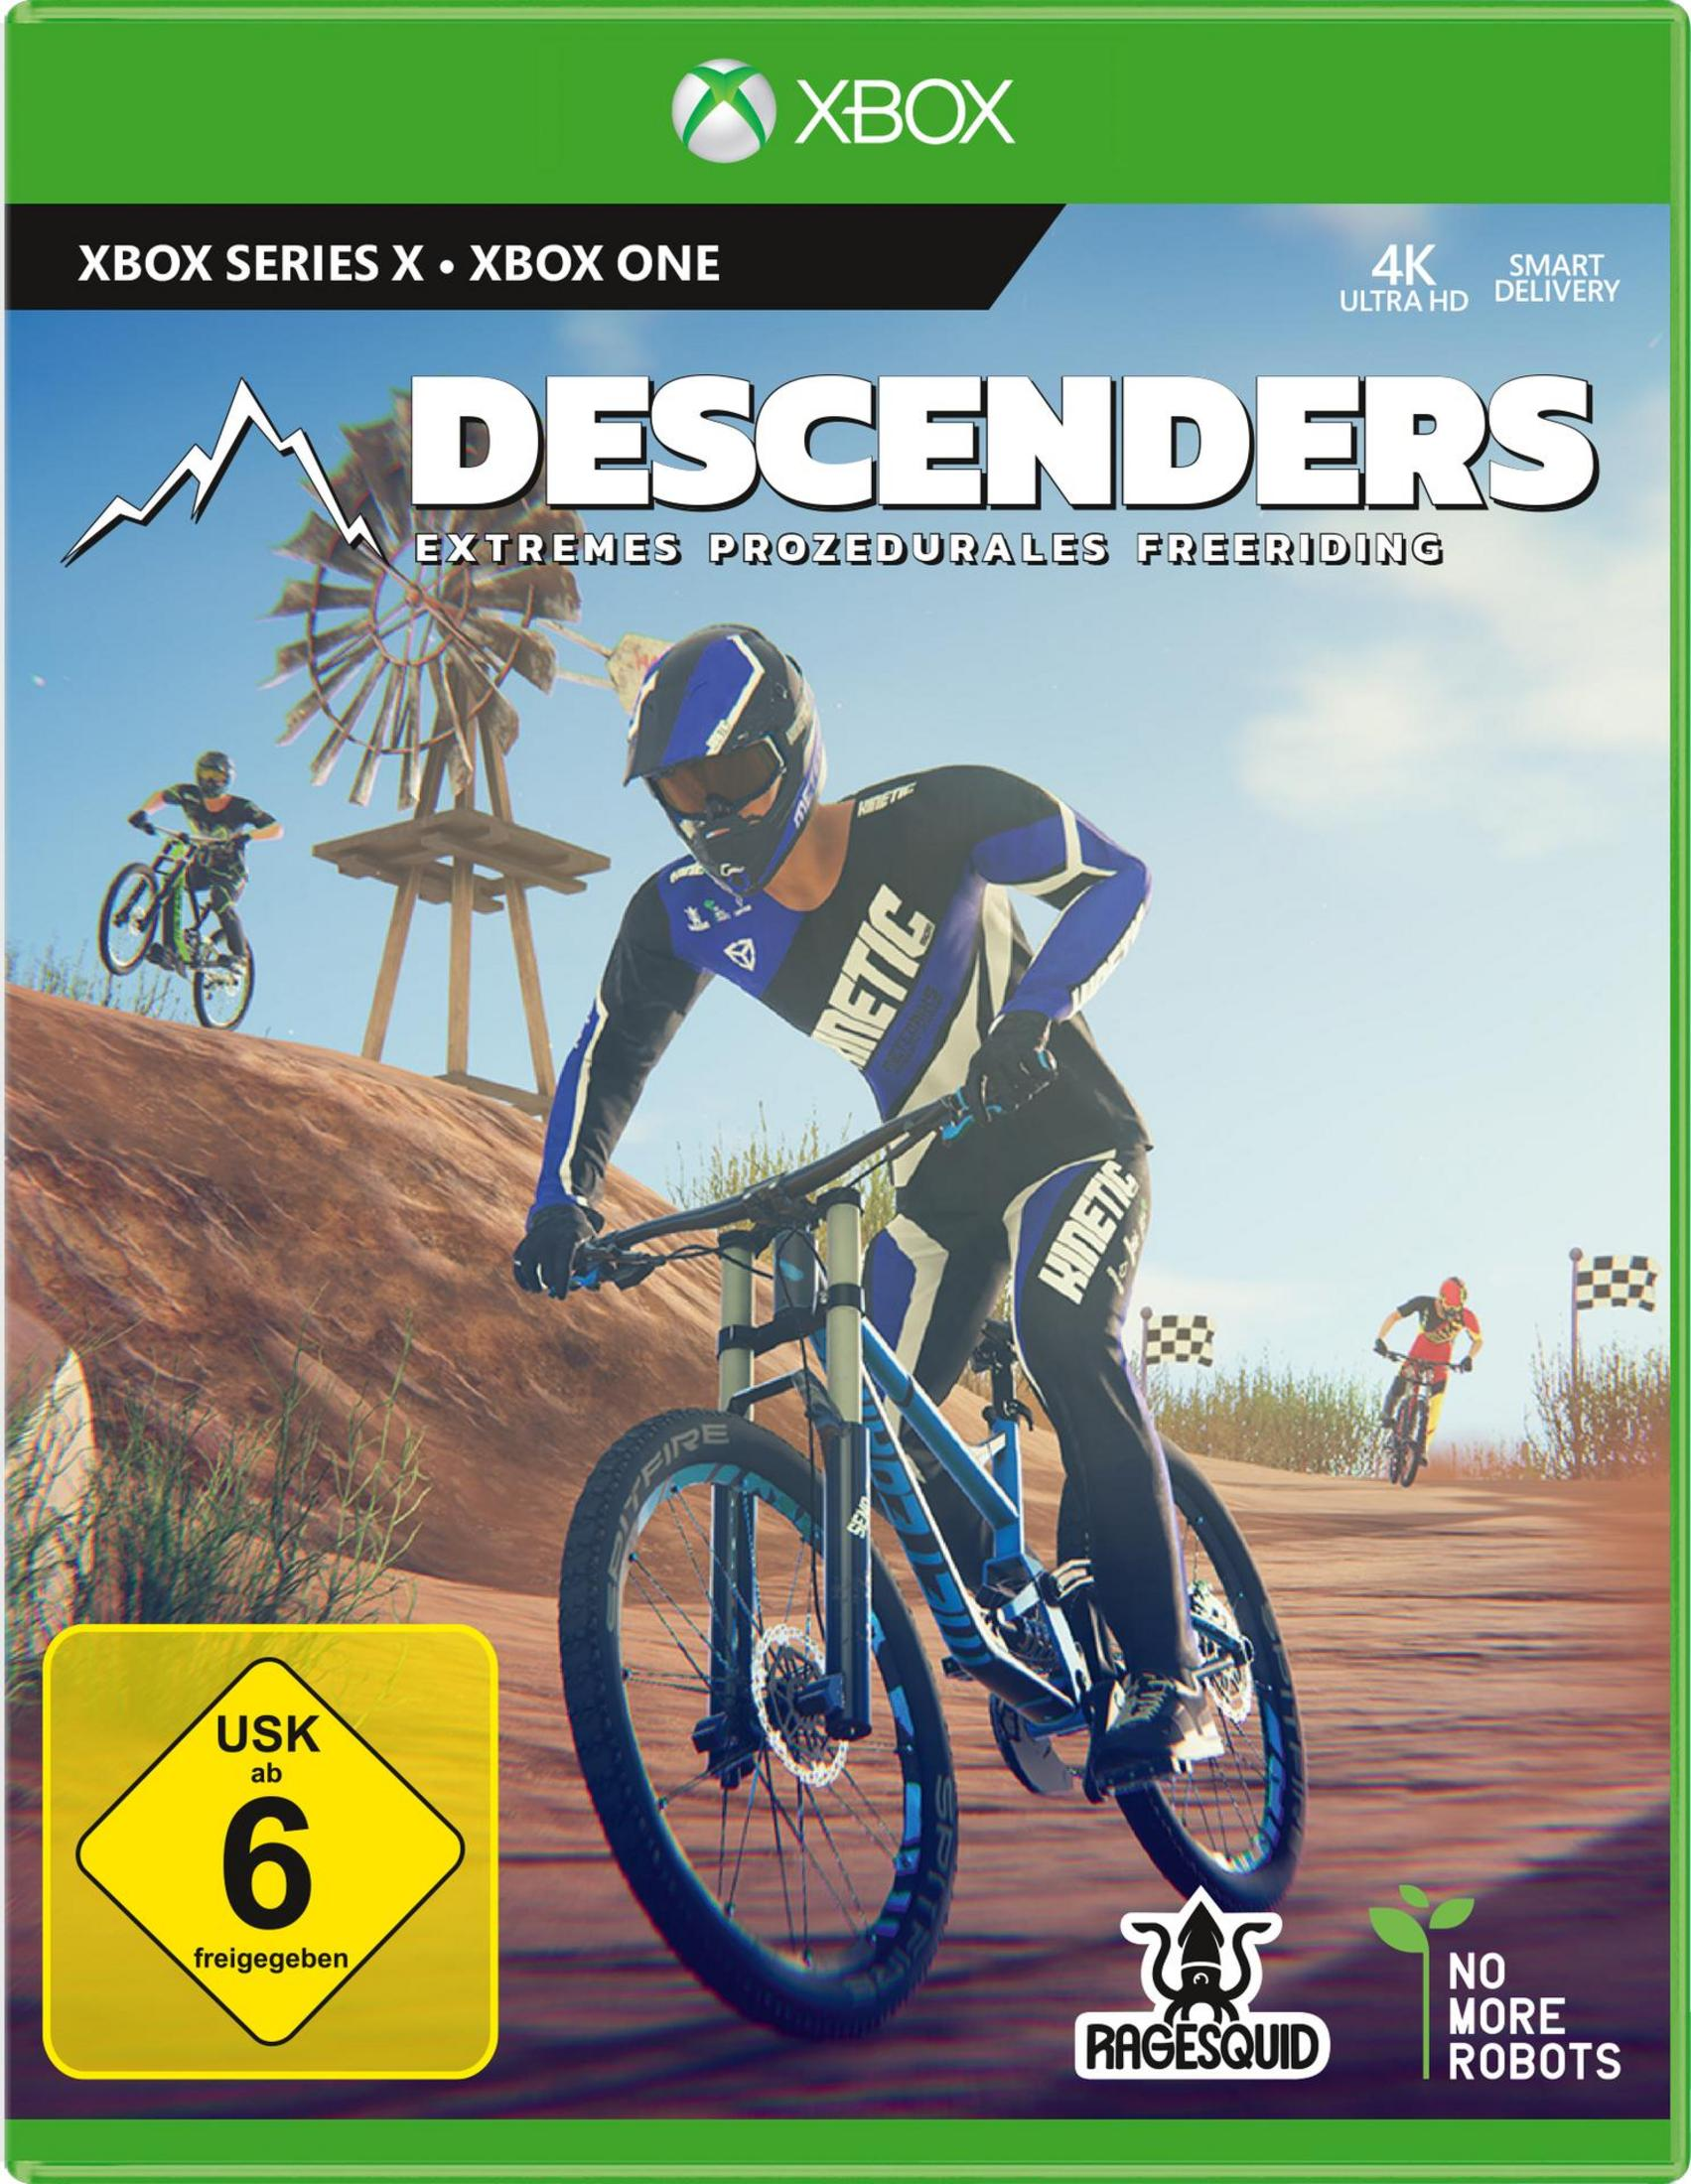 Descenders XBSX - [Xbox One